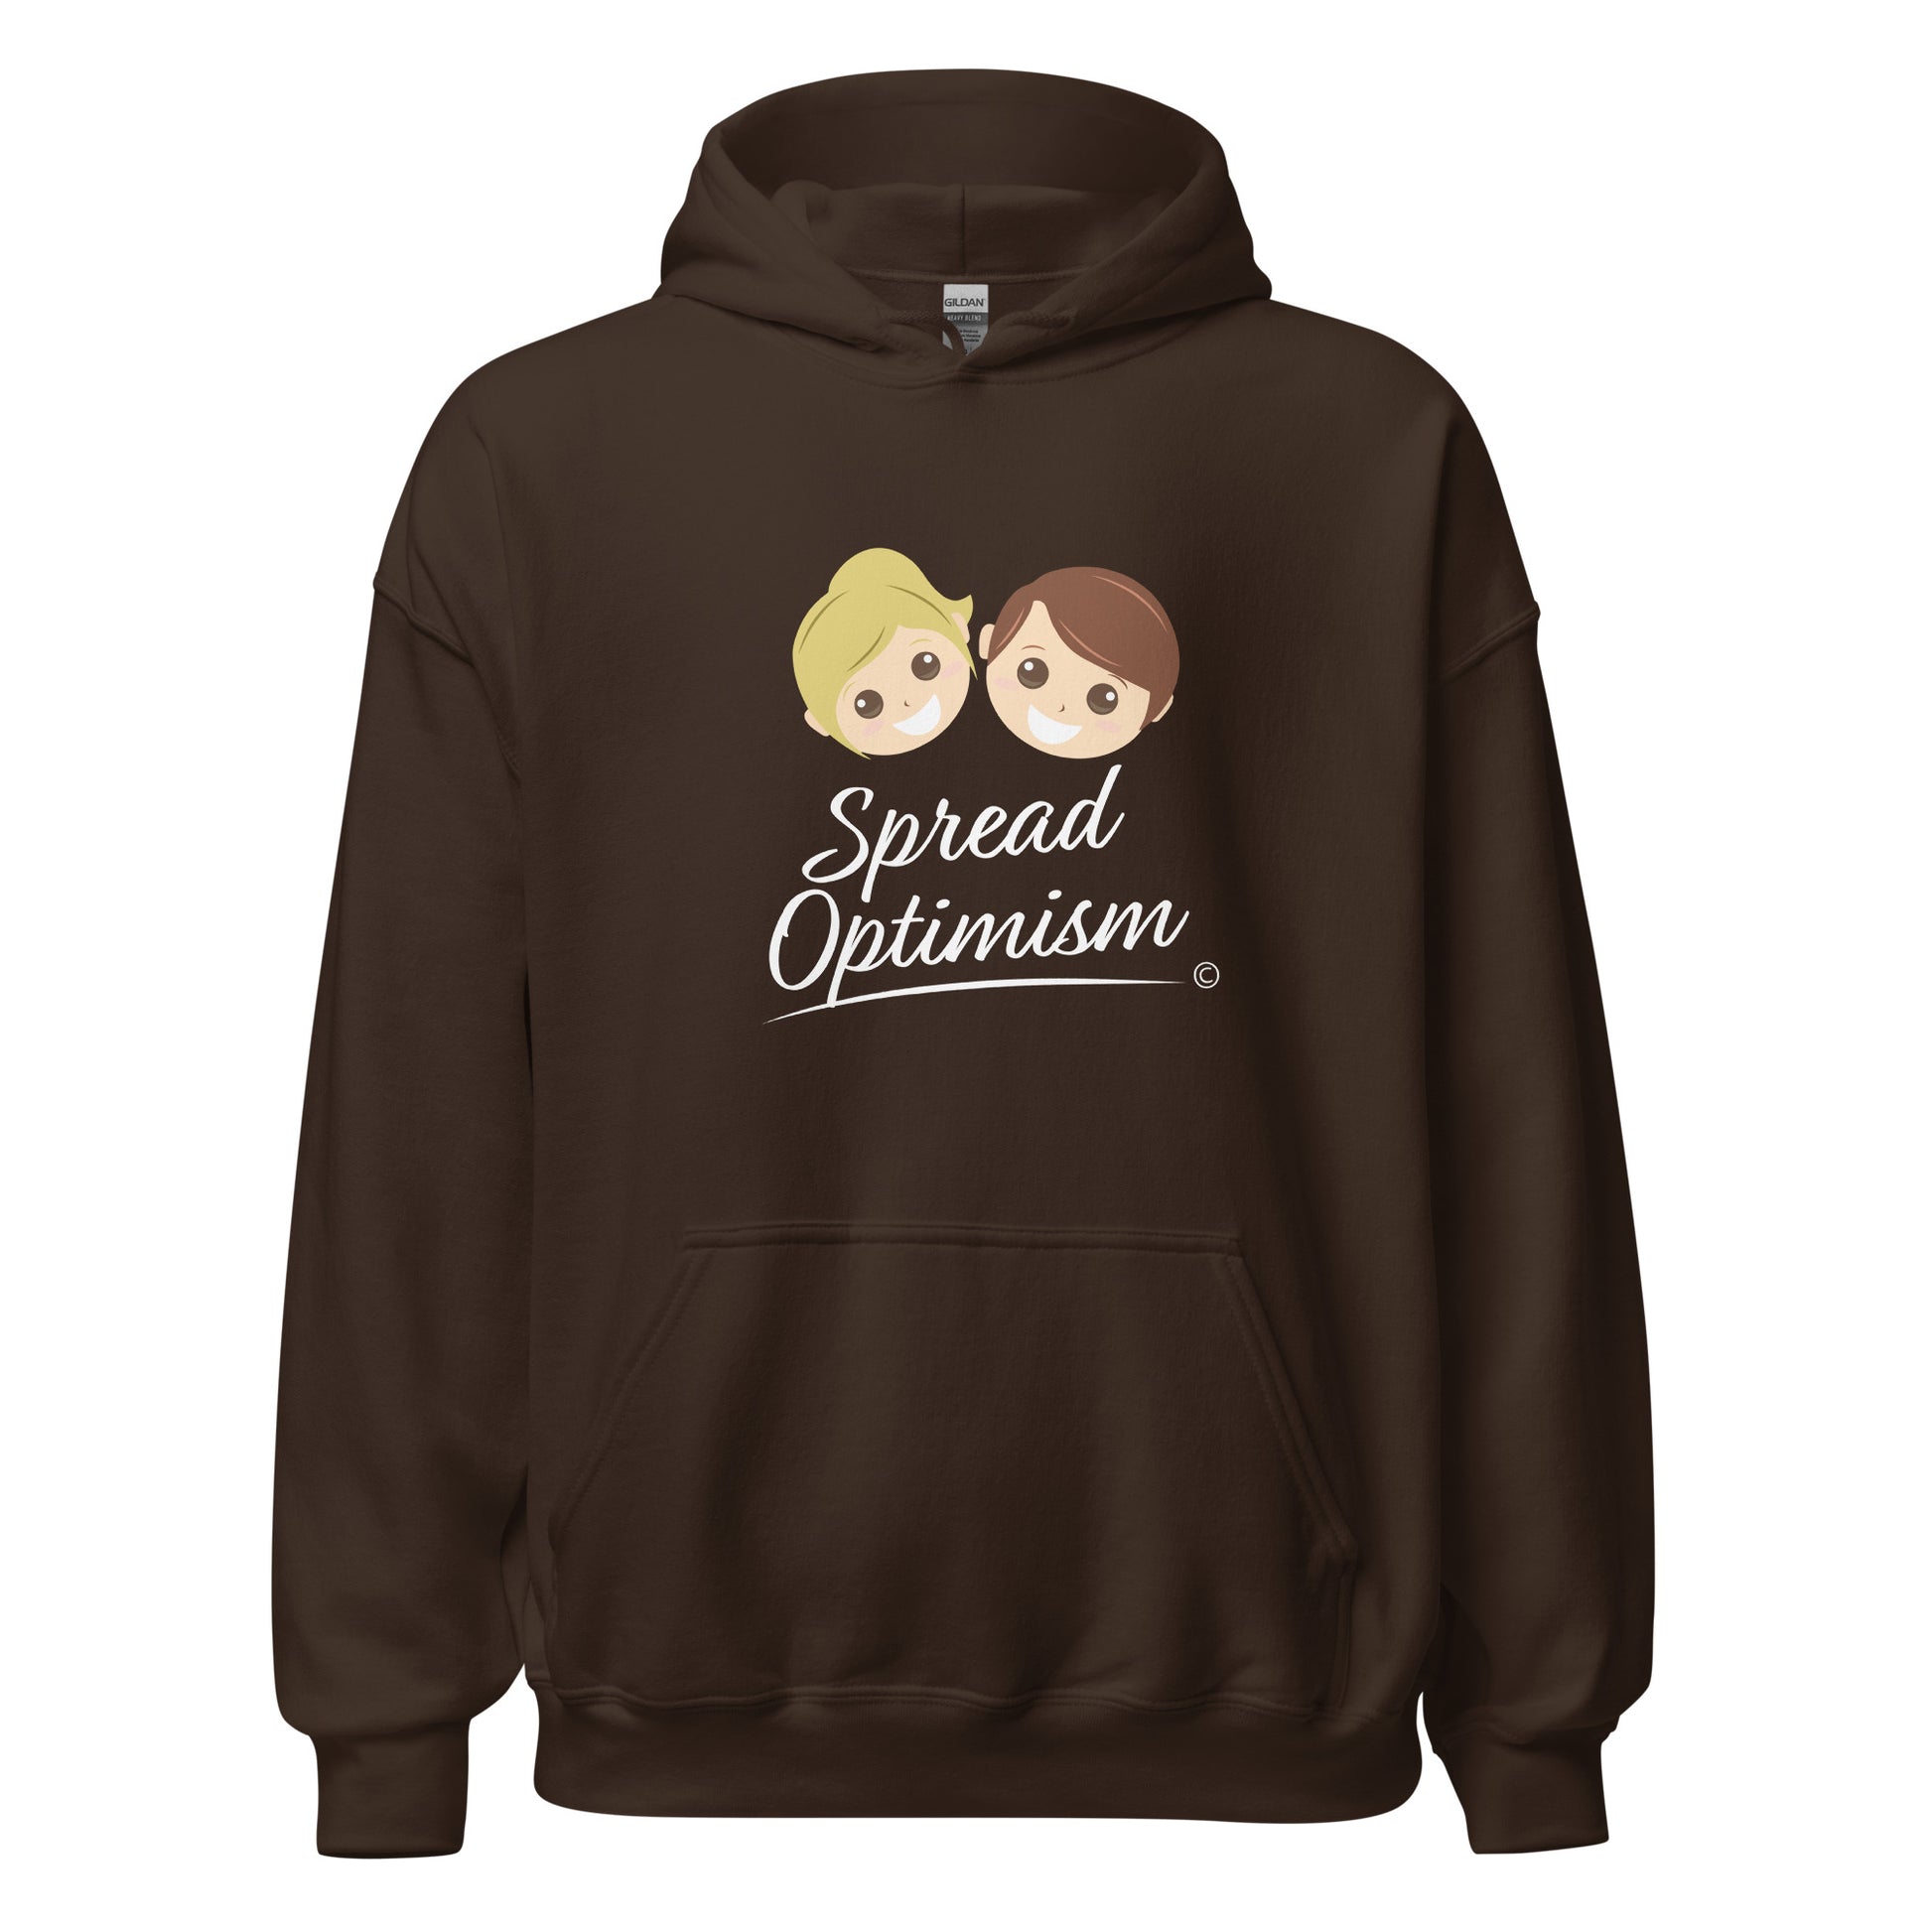 Outdoor unisex hoodies for him and her-Dark Chocolate